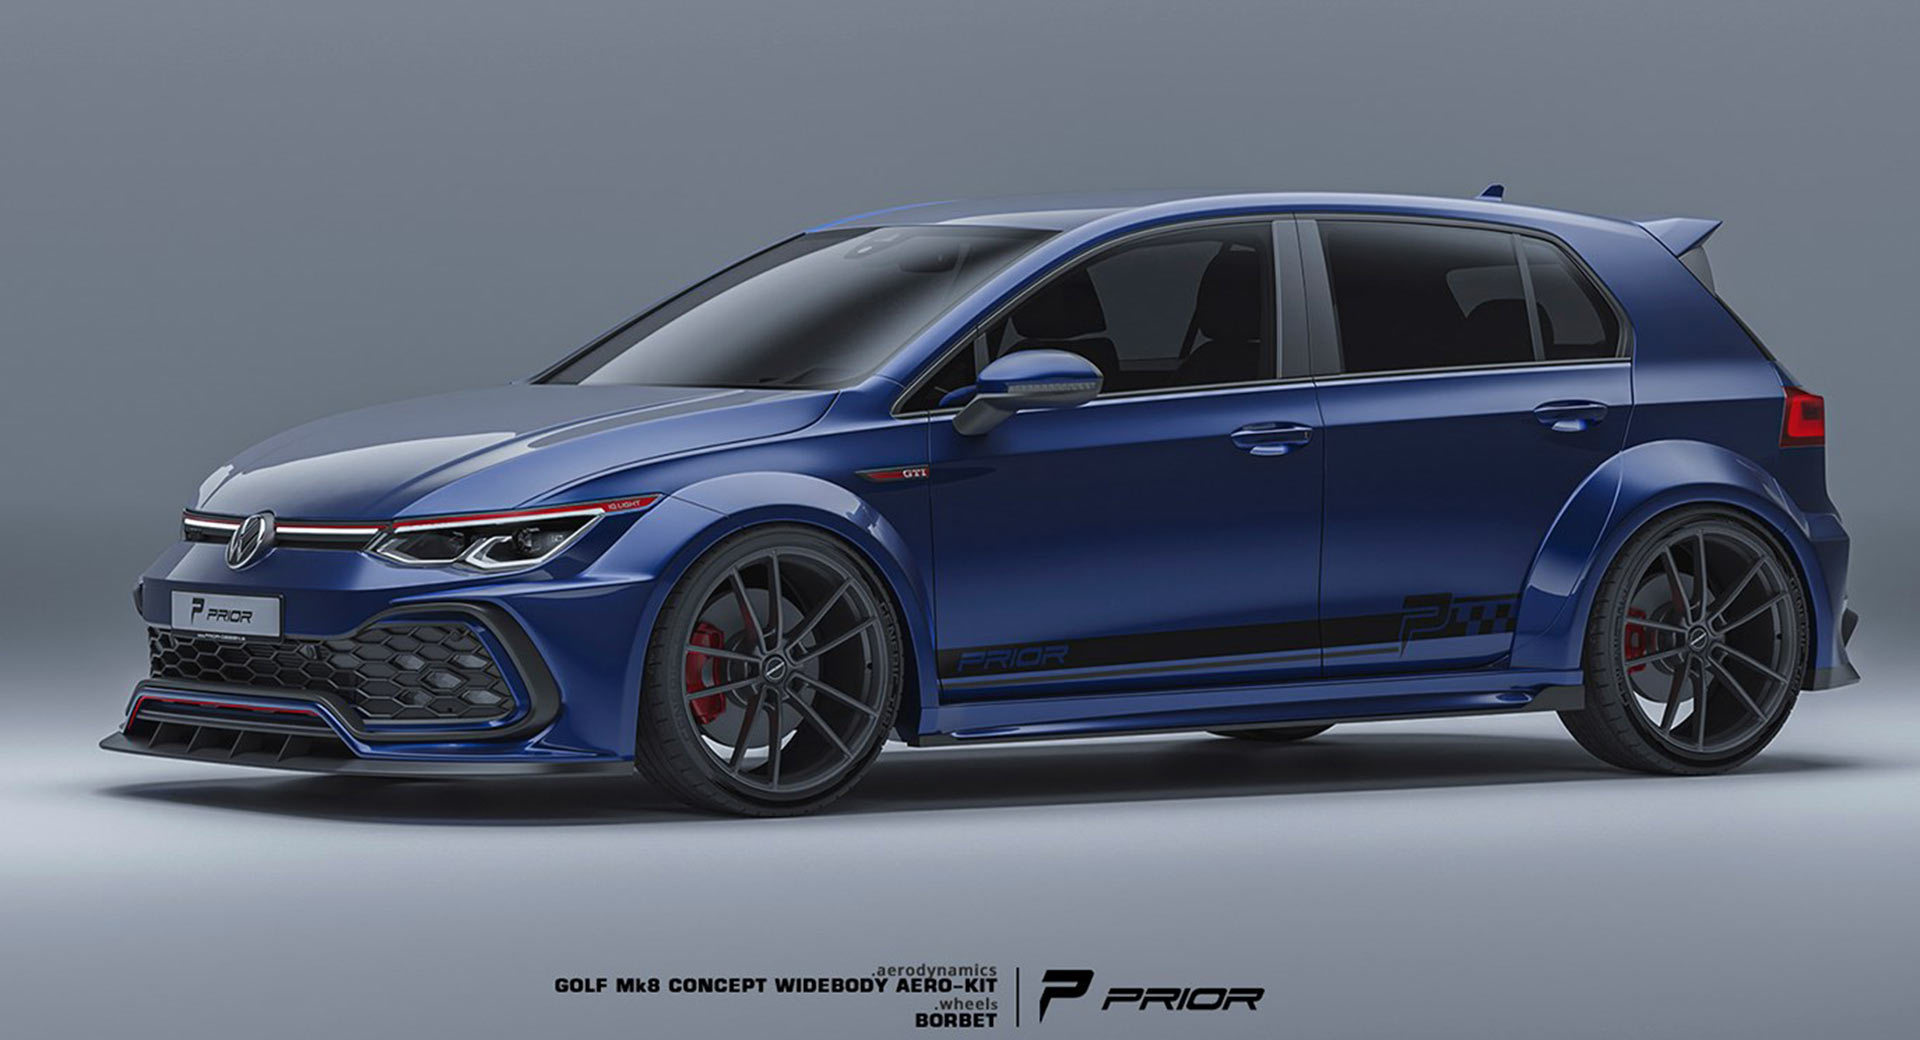 Would A Wild Widebody Kit For The 2022 VW Golf GTI Mk8 Interest You